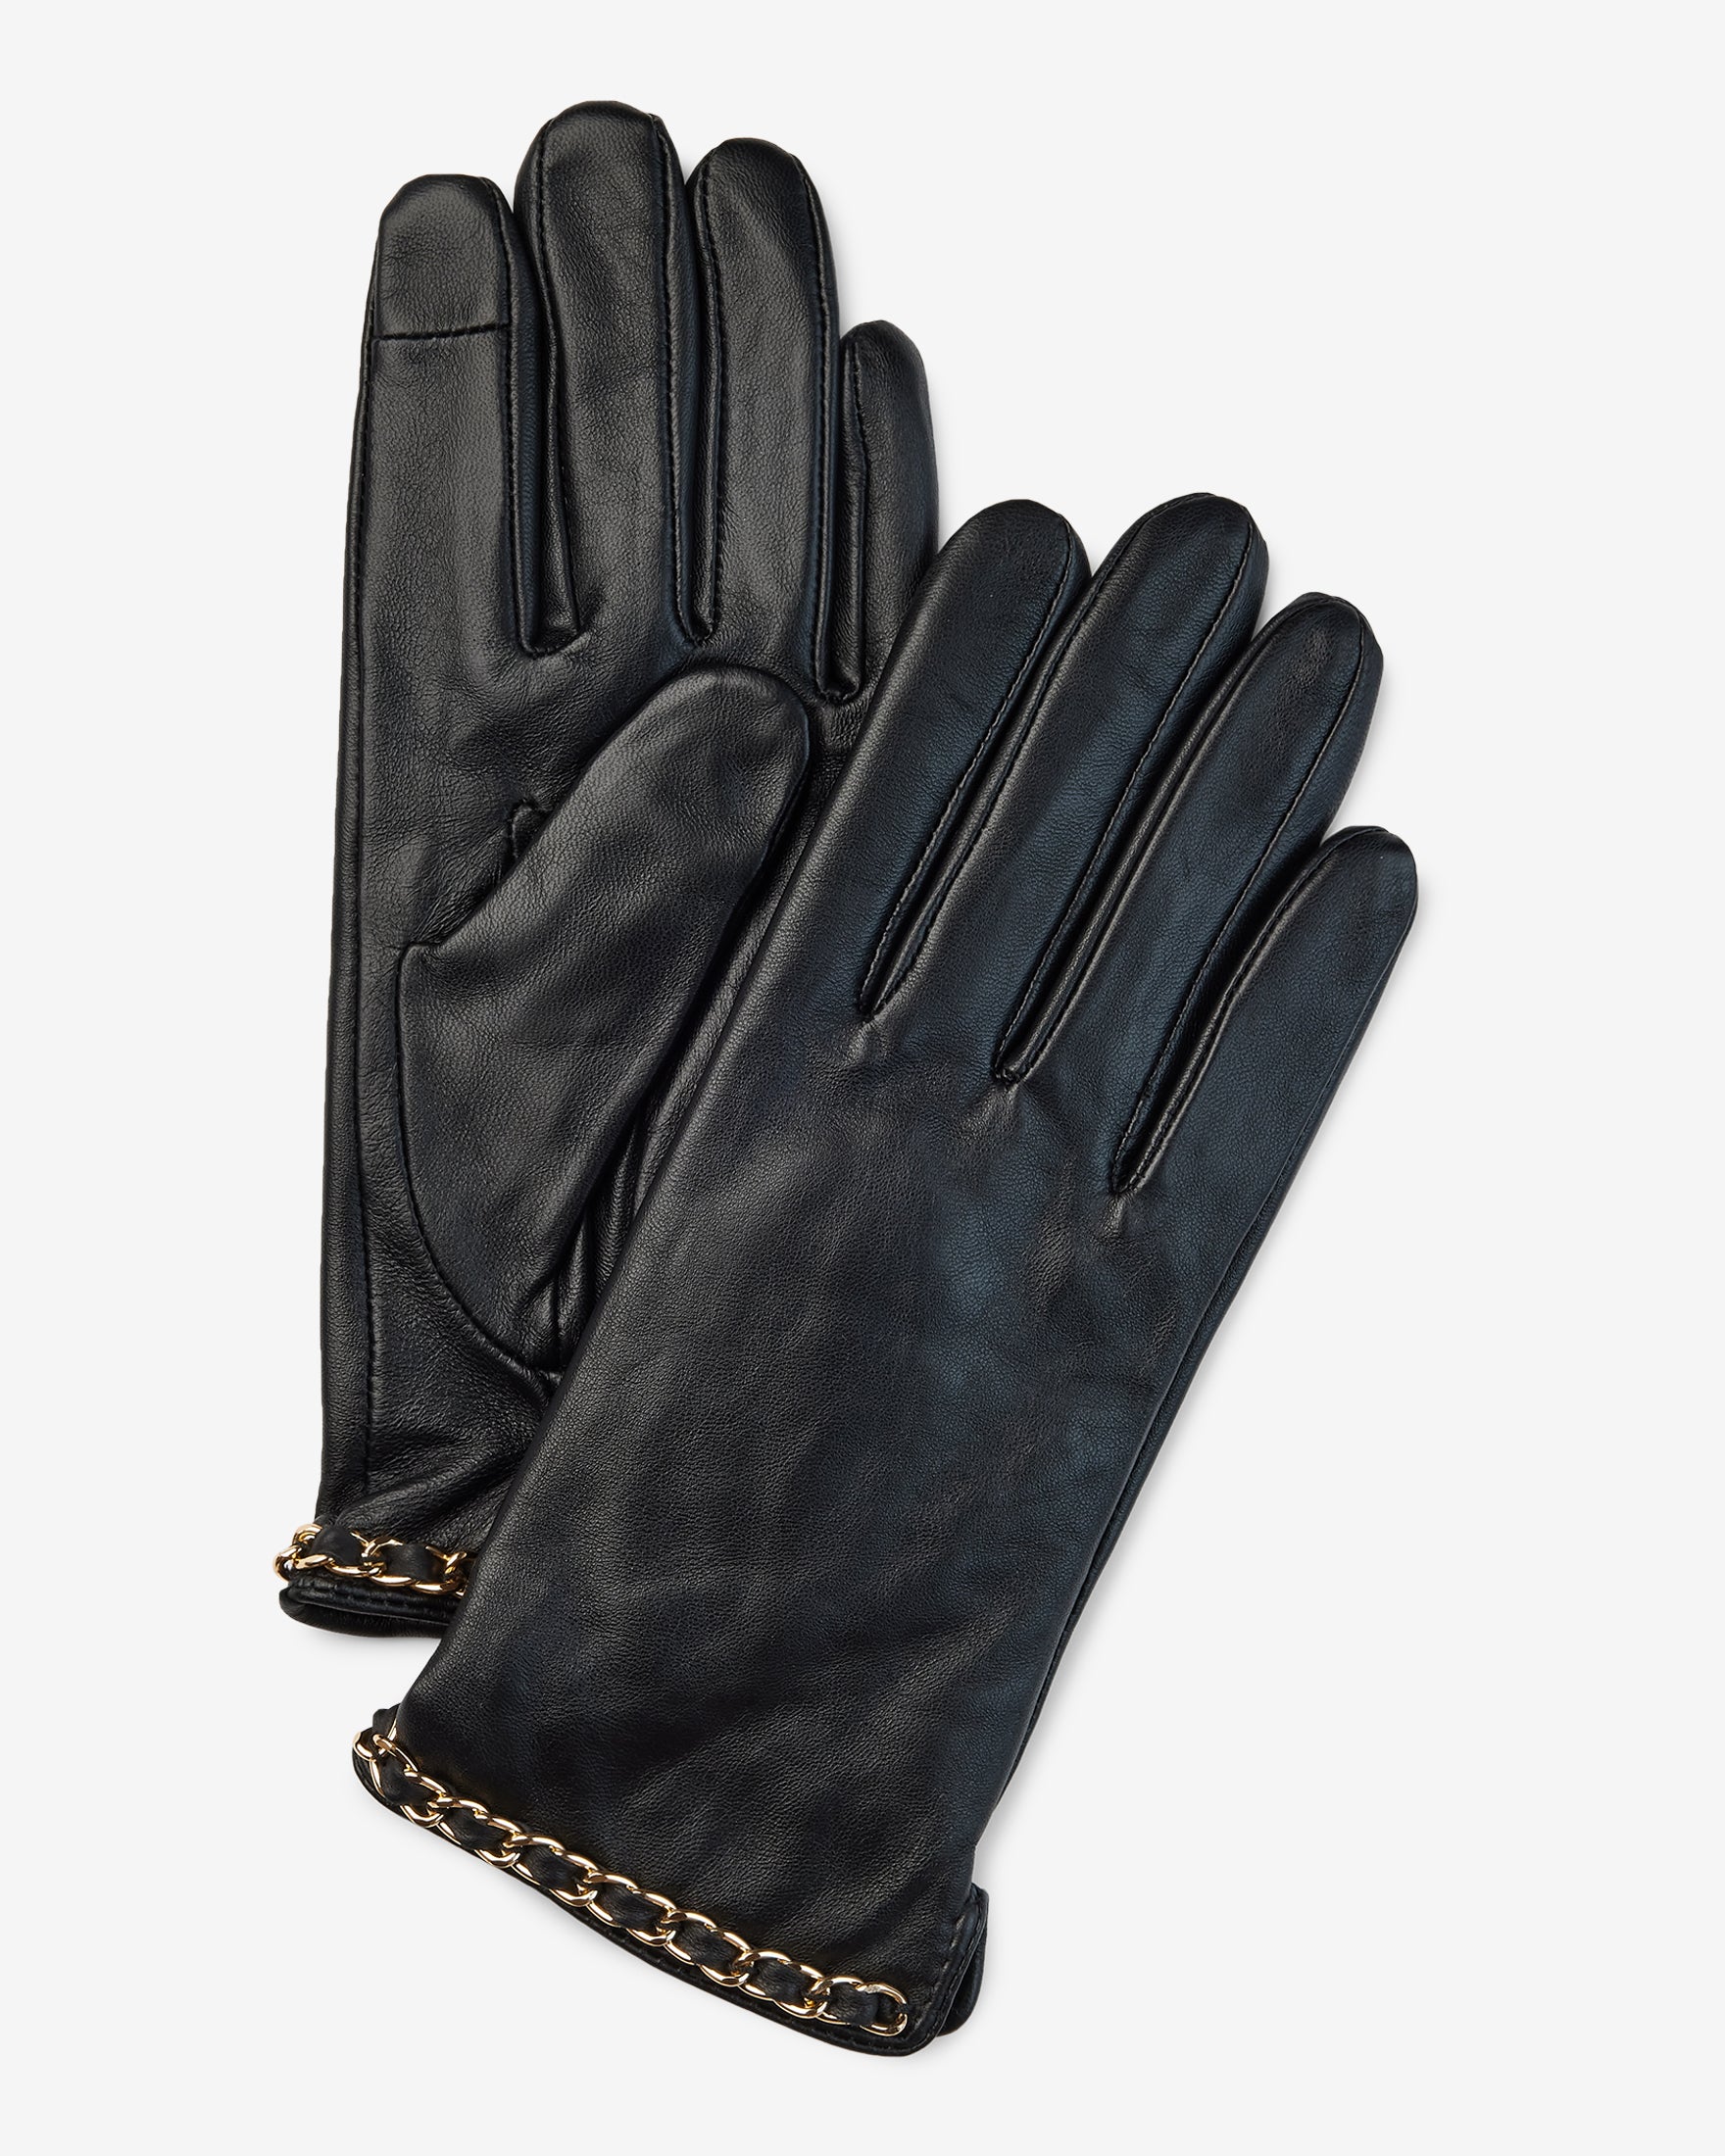 Black leather gloves with gold chain around wrist